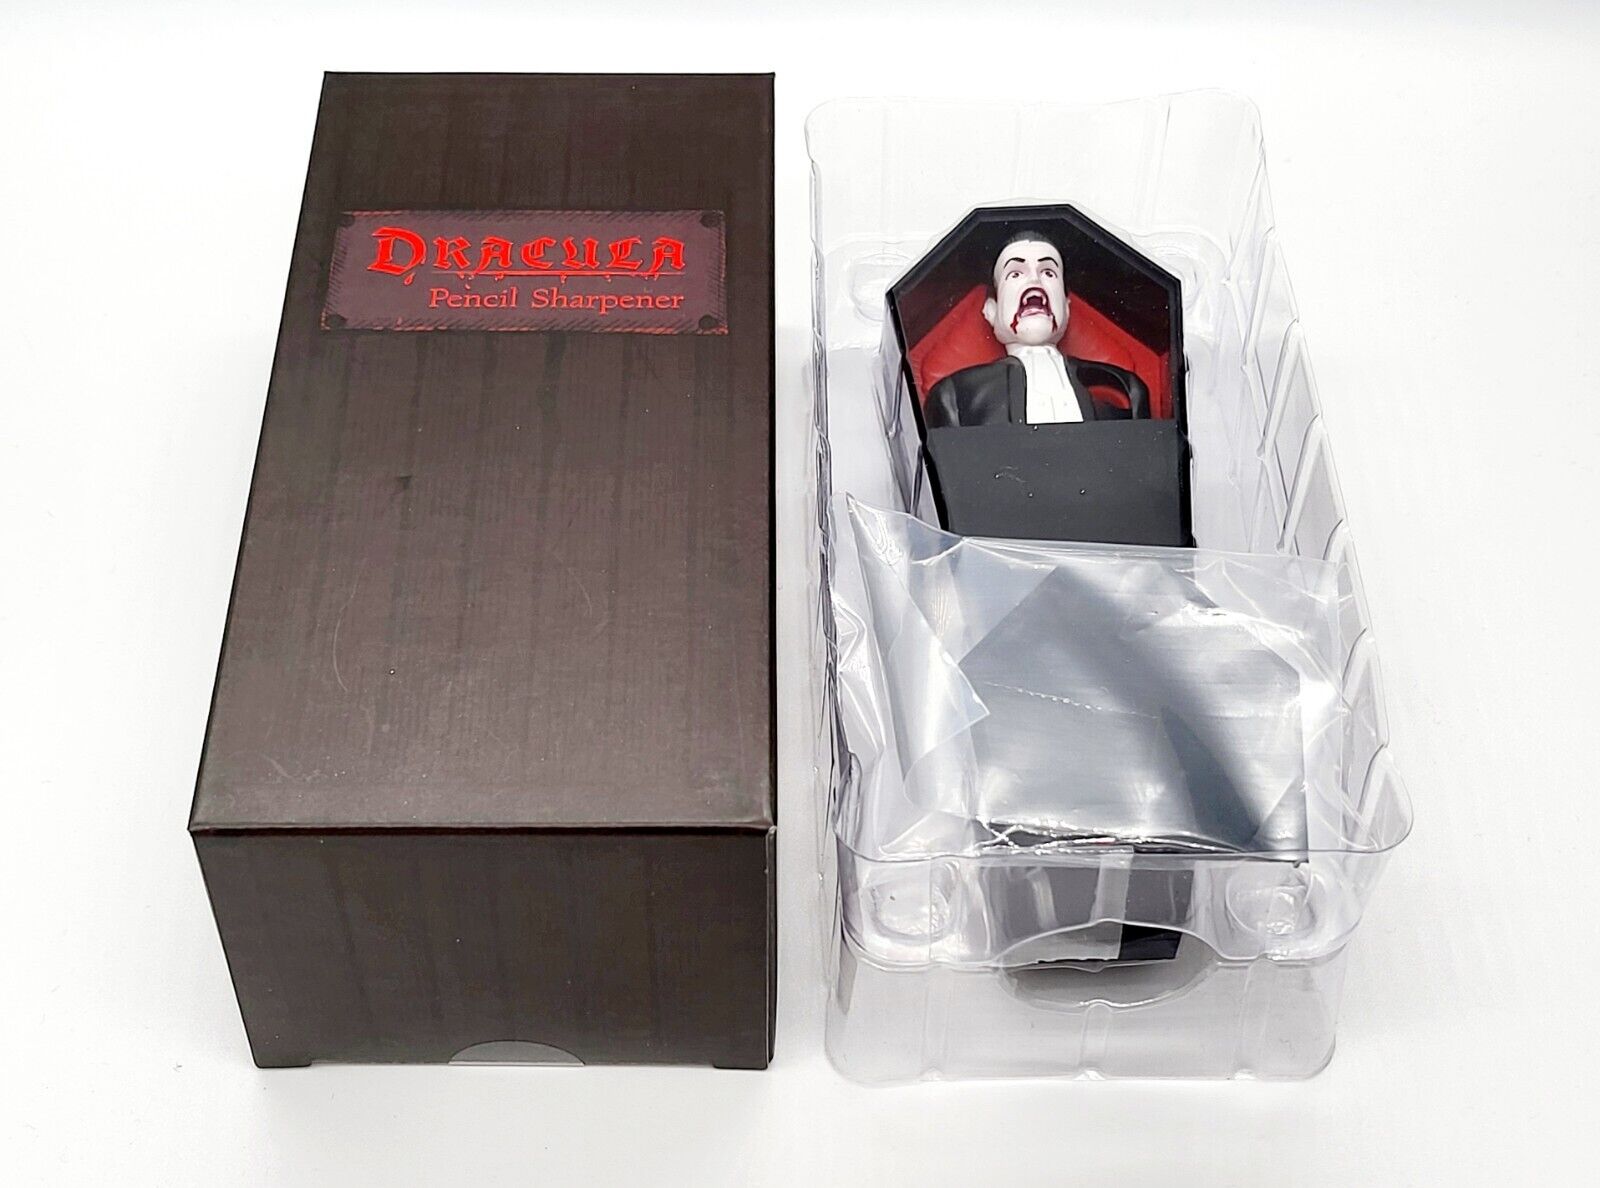 2019 Loot Crate Exclusive Dracula Coffin Pencil Sharpener Brand New Open Box